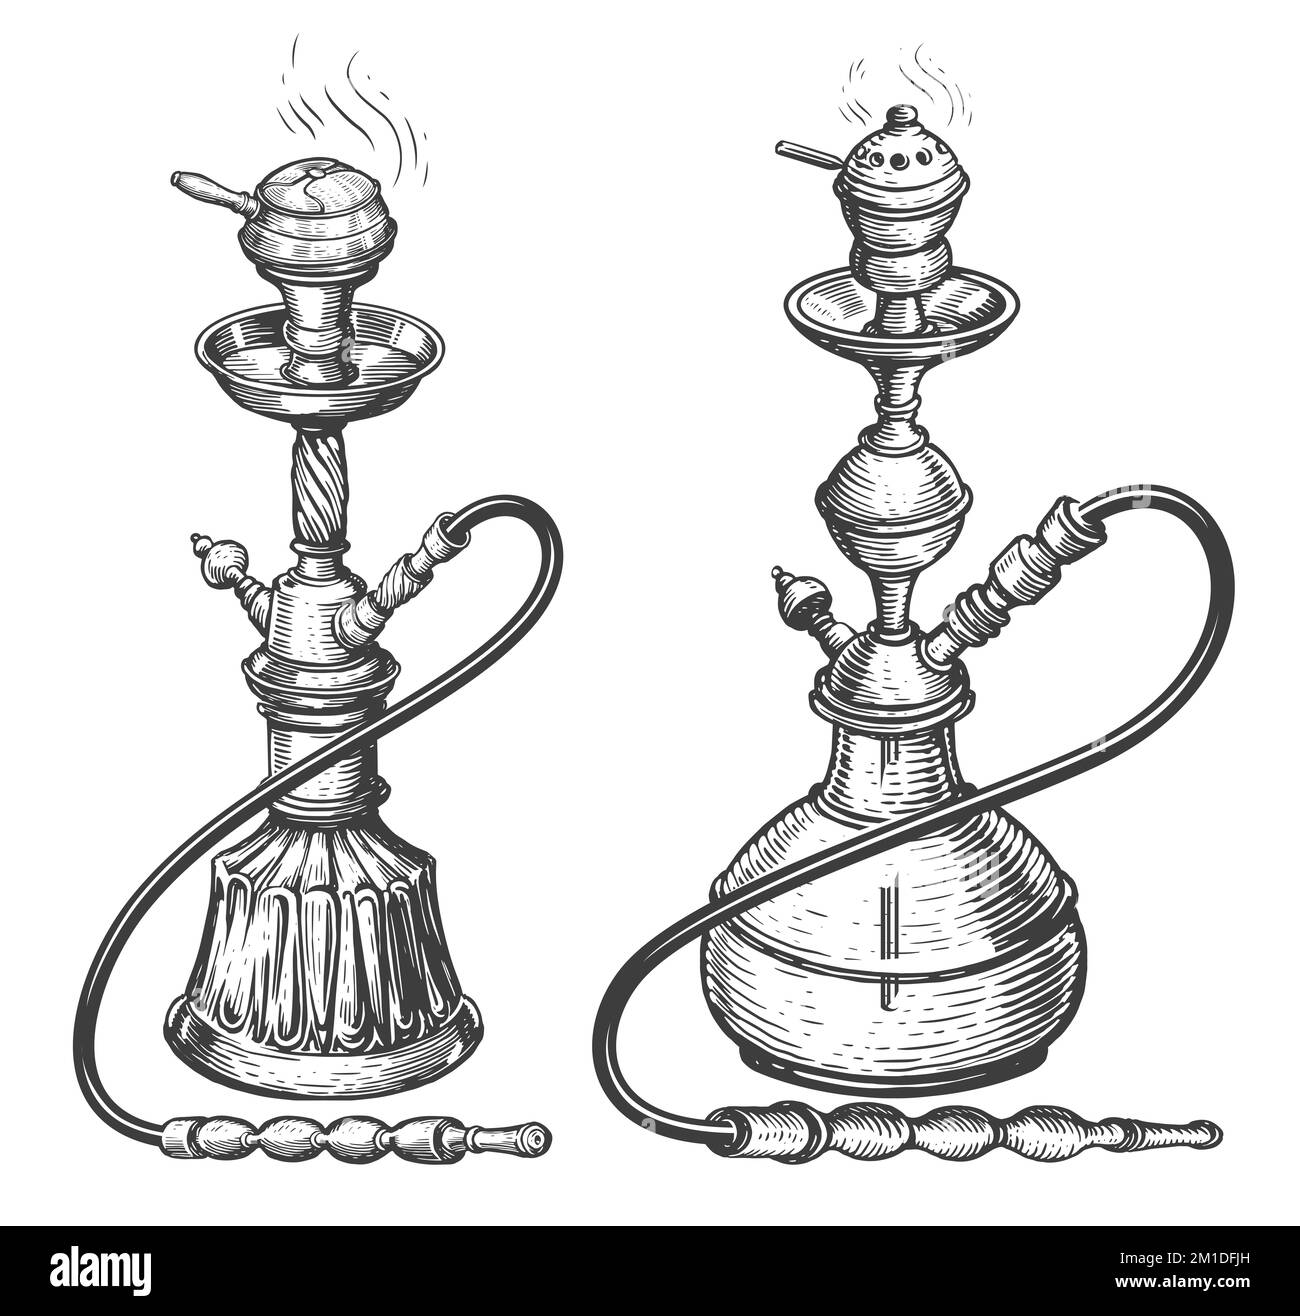 Hookah collection sketch isolated. Tobacco smoking equipment set. Hand drawn vintage illustration Stock Photo